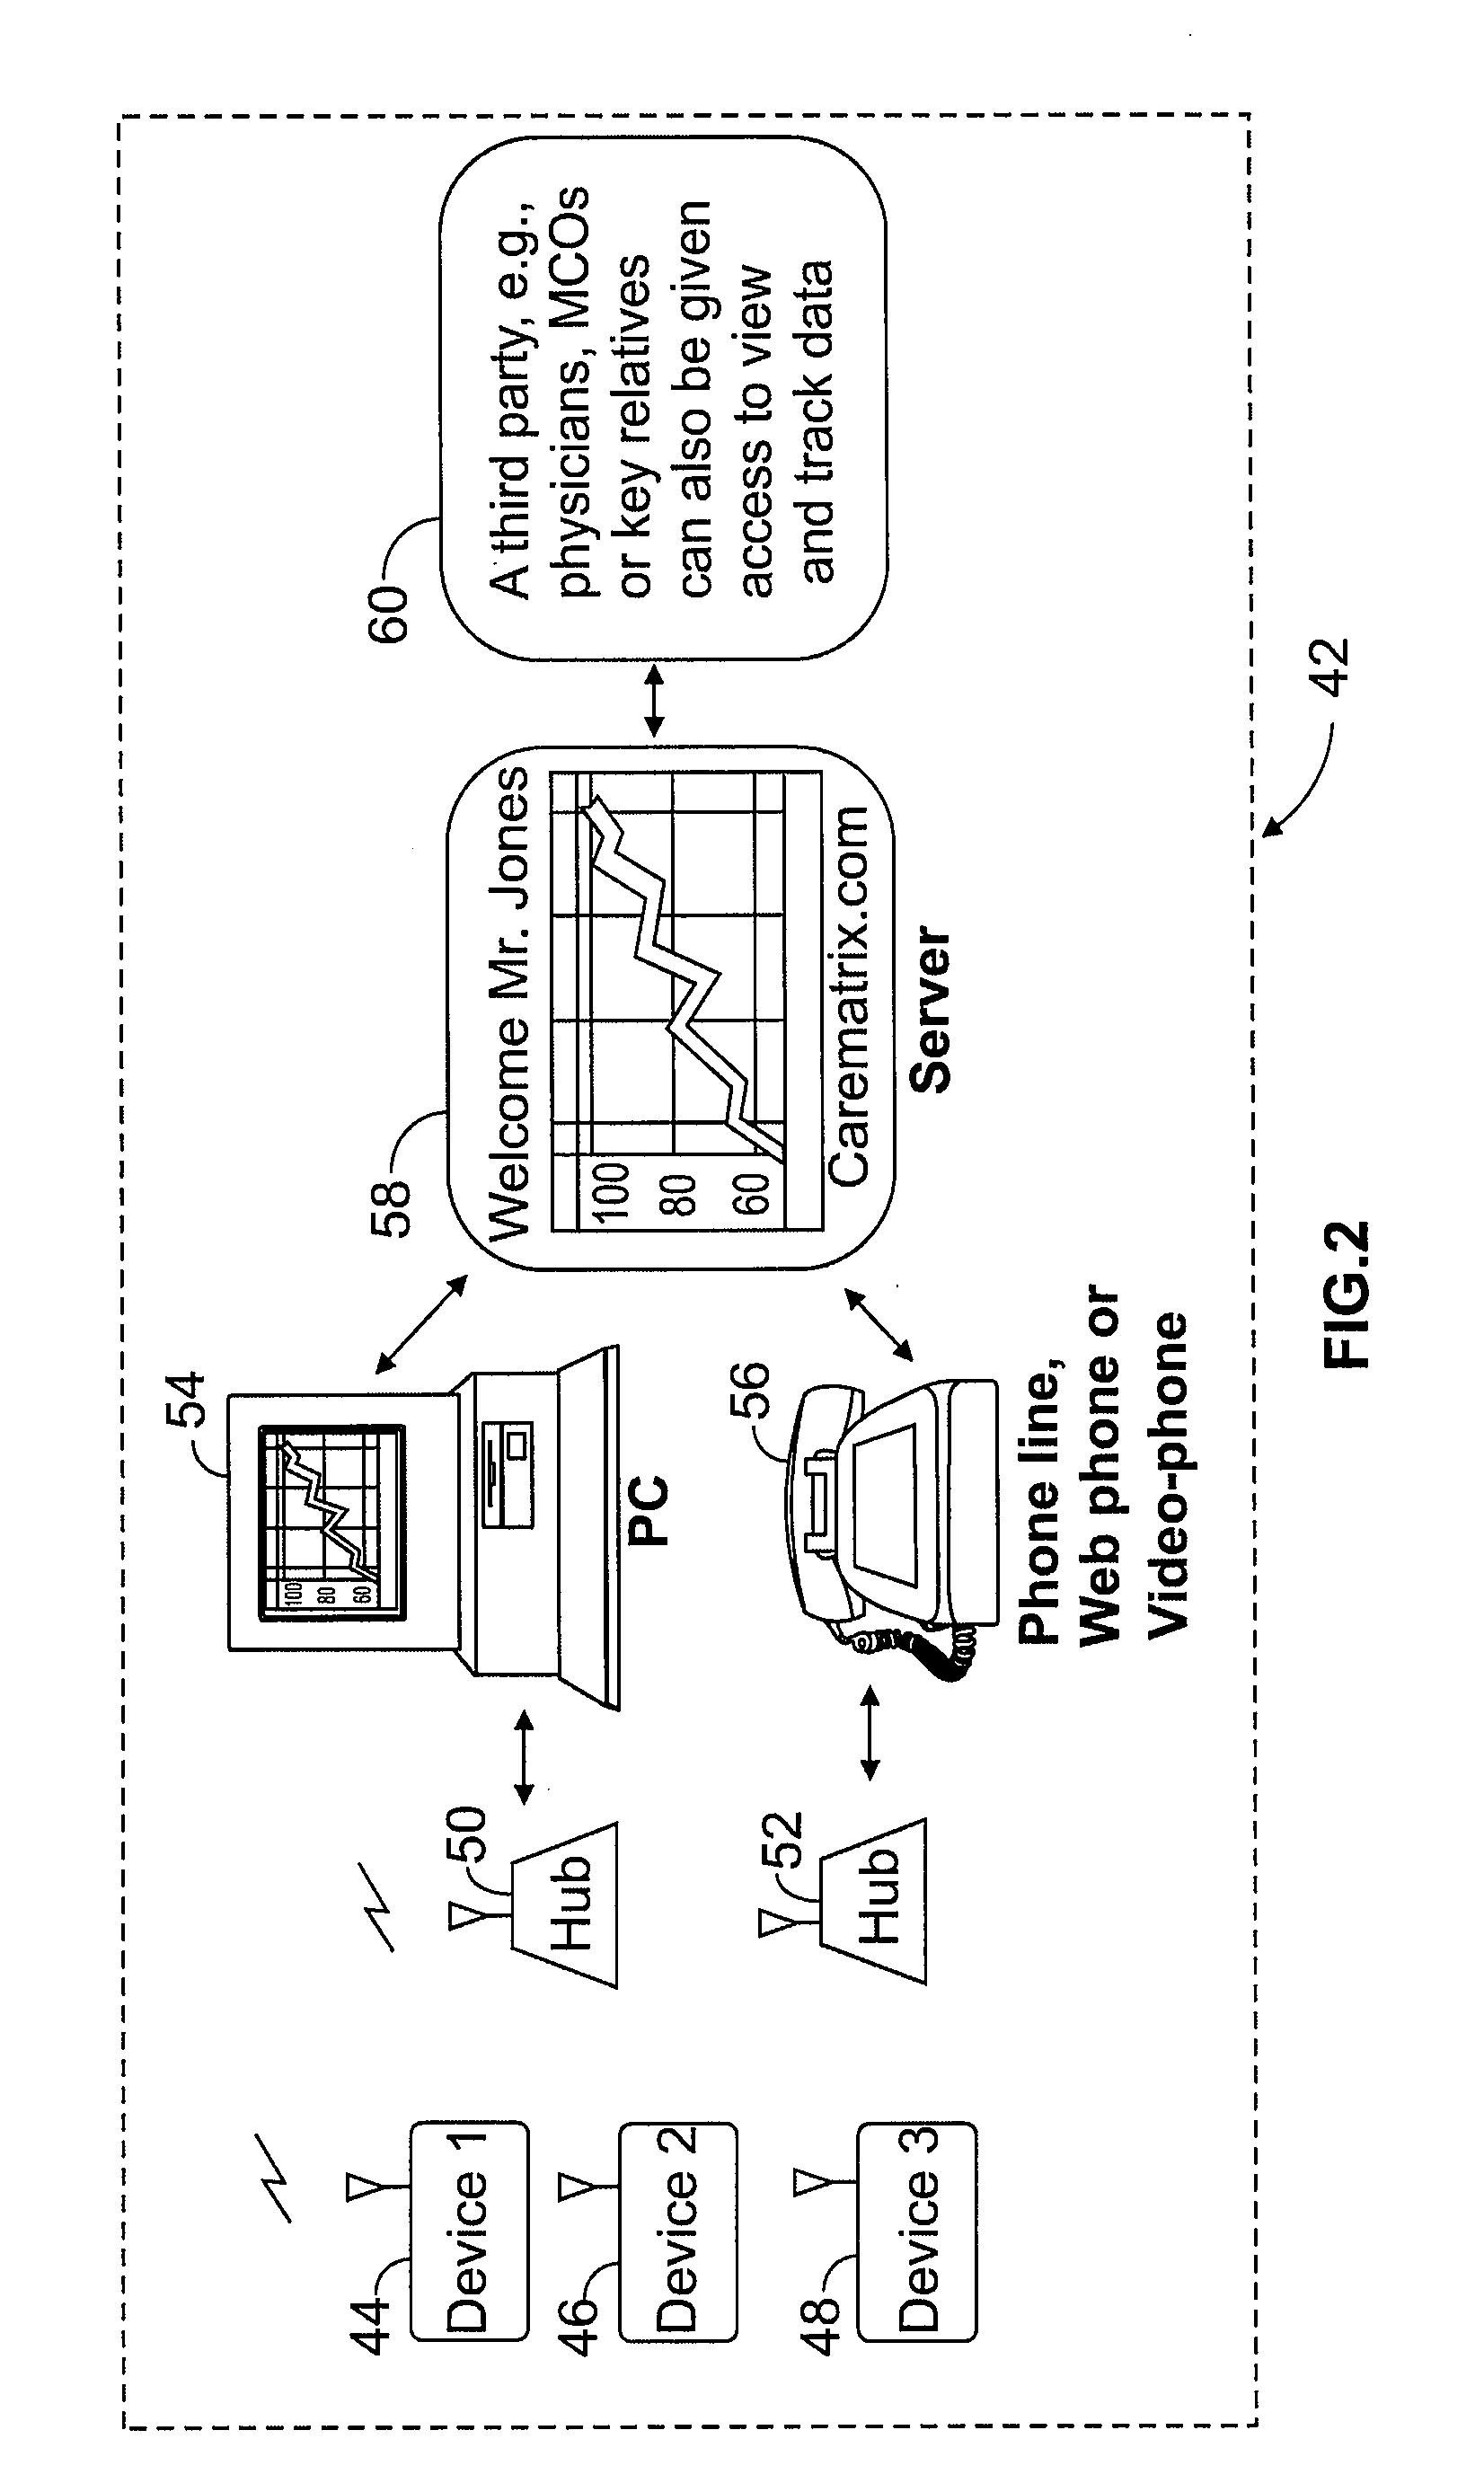 Method and Apparatus for Remotely Monitoring the Condition of a Patient